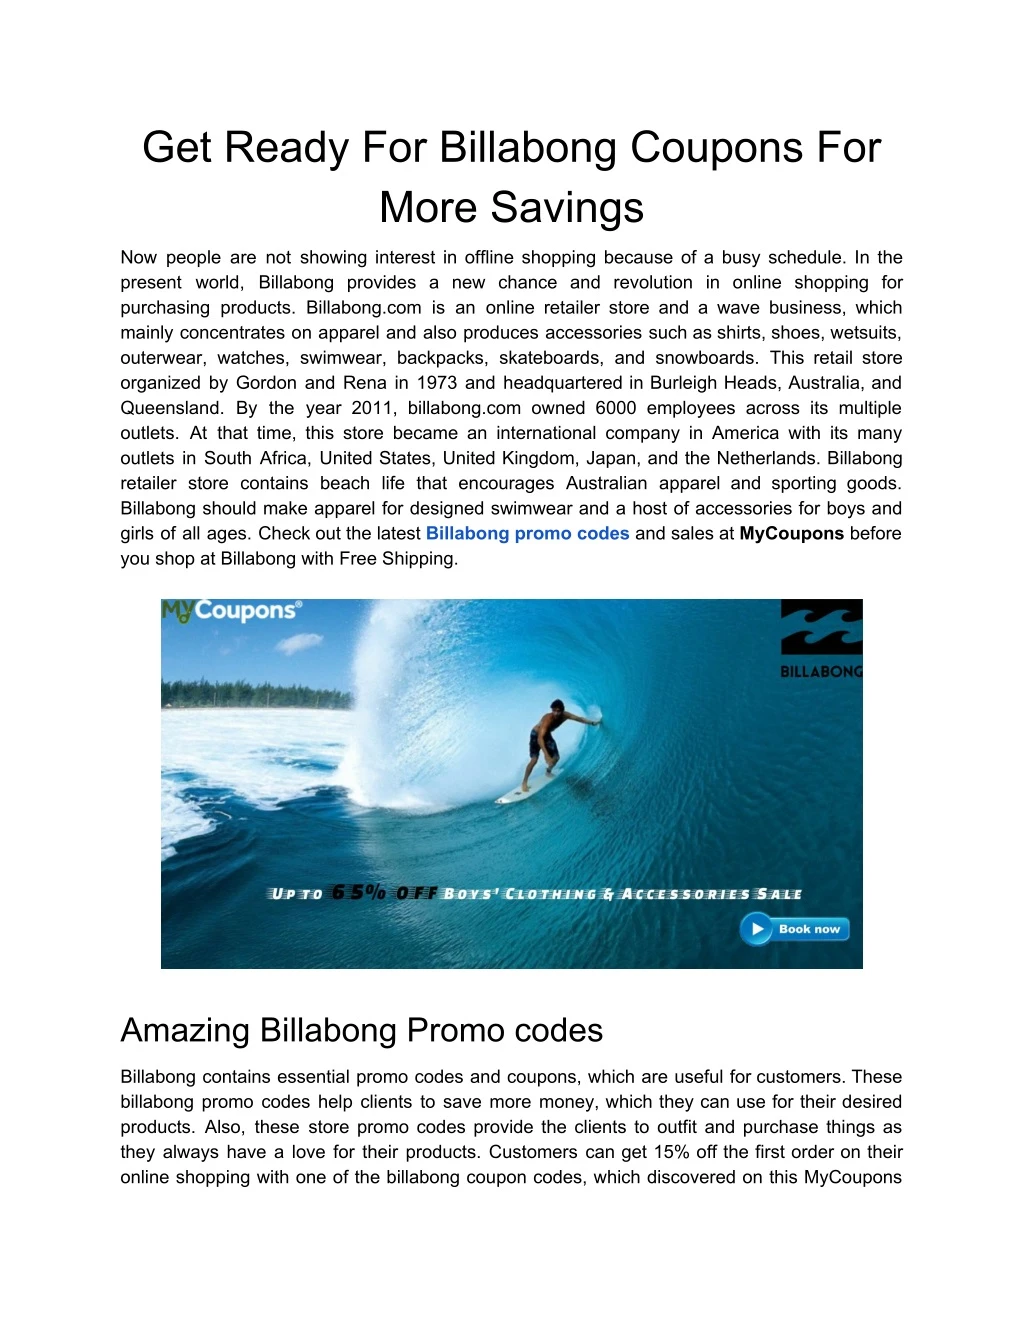 get ready for billabong coupons for more savings